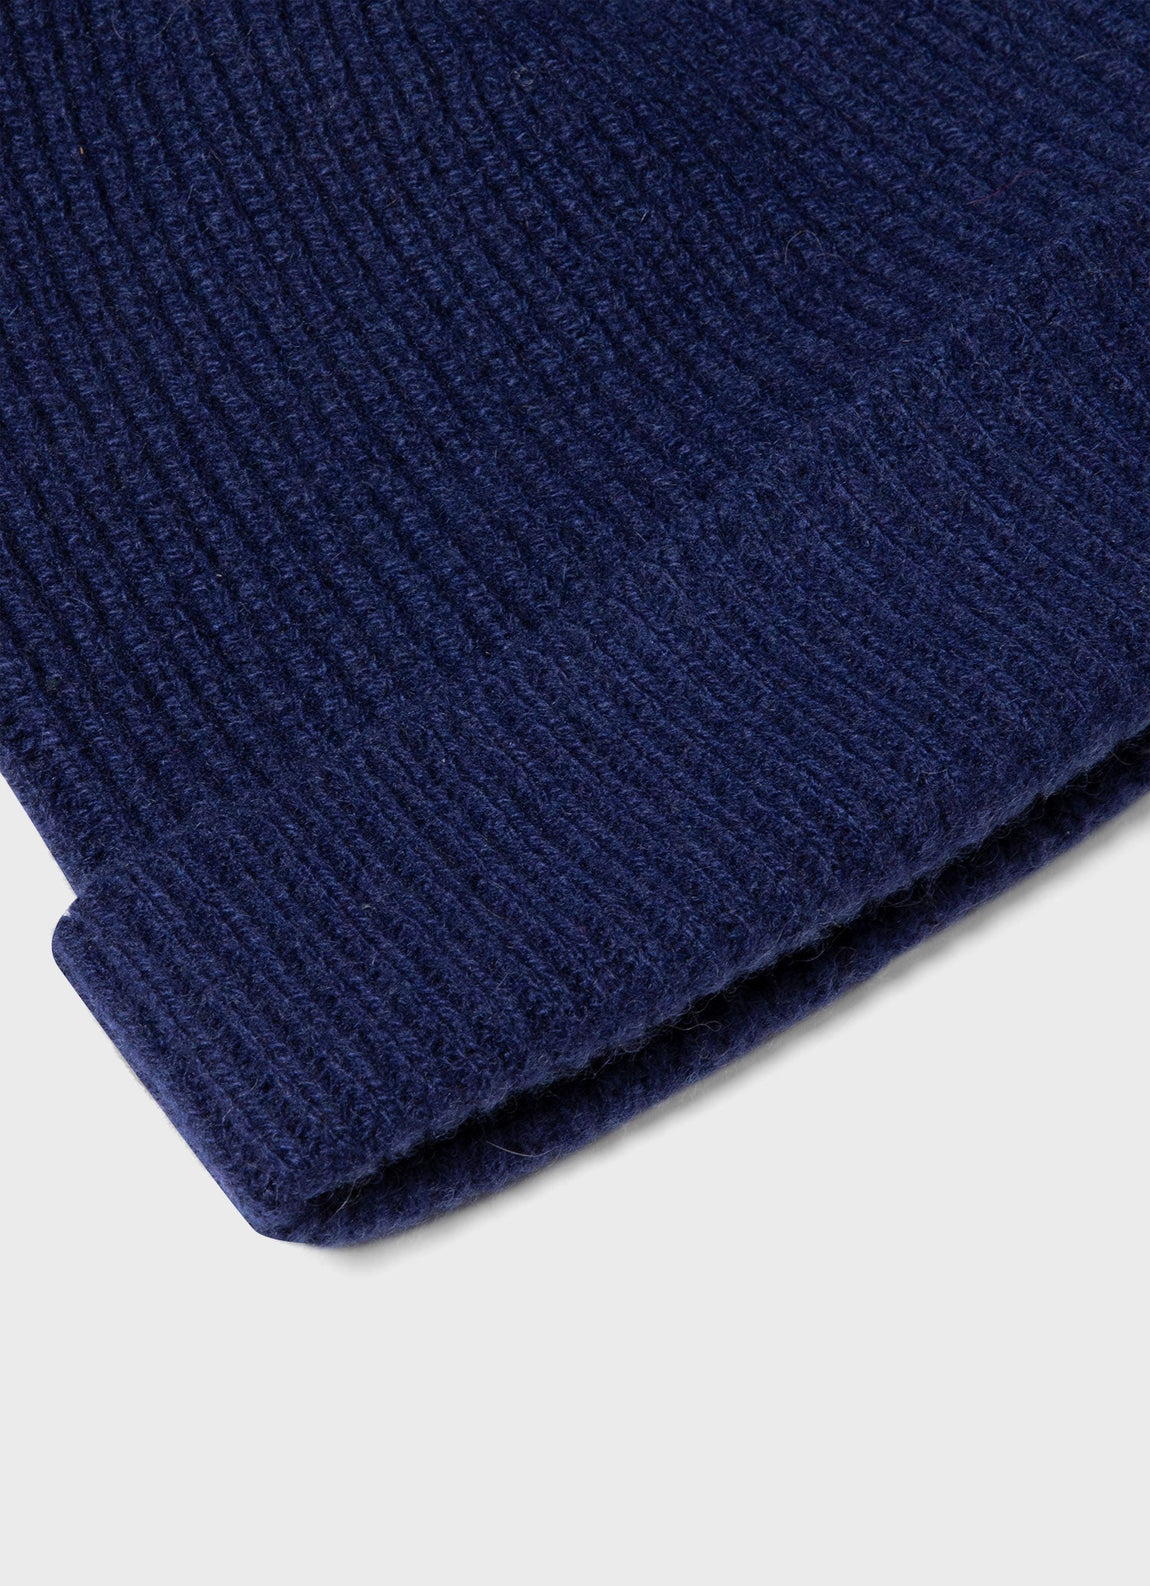 Cashmere Ribbed Hat in Space Blue